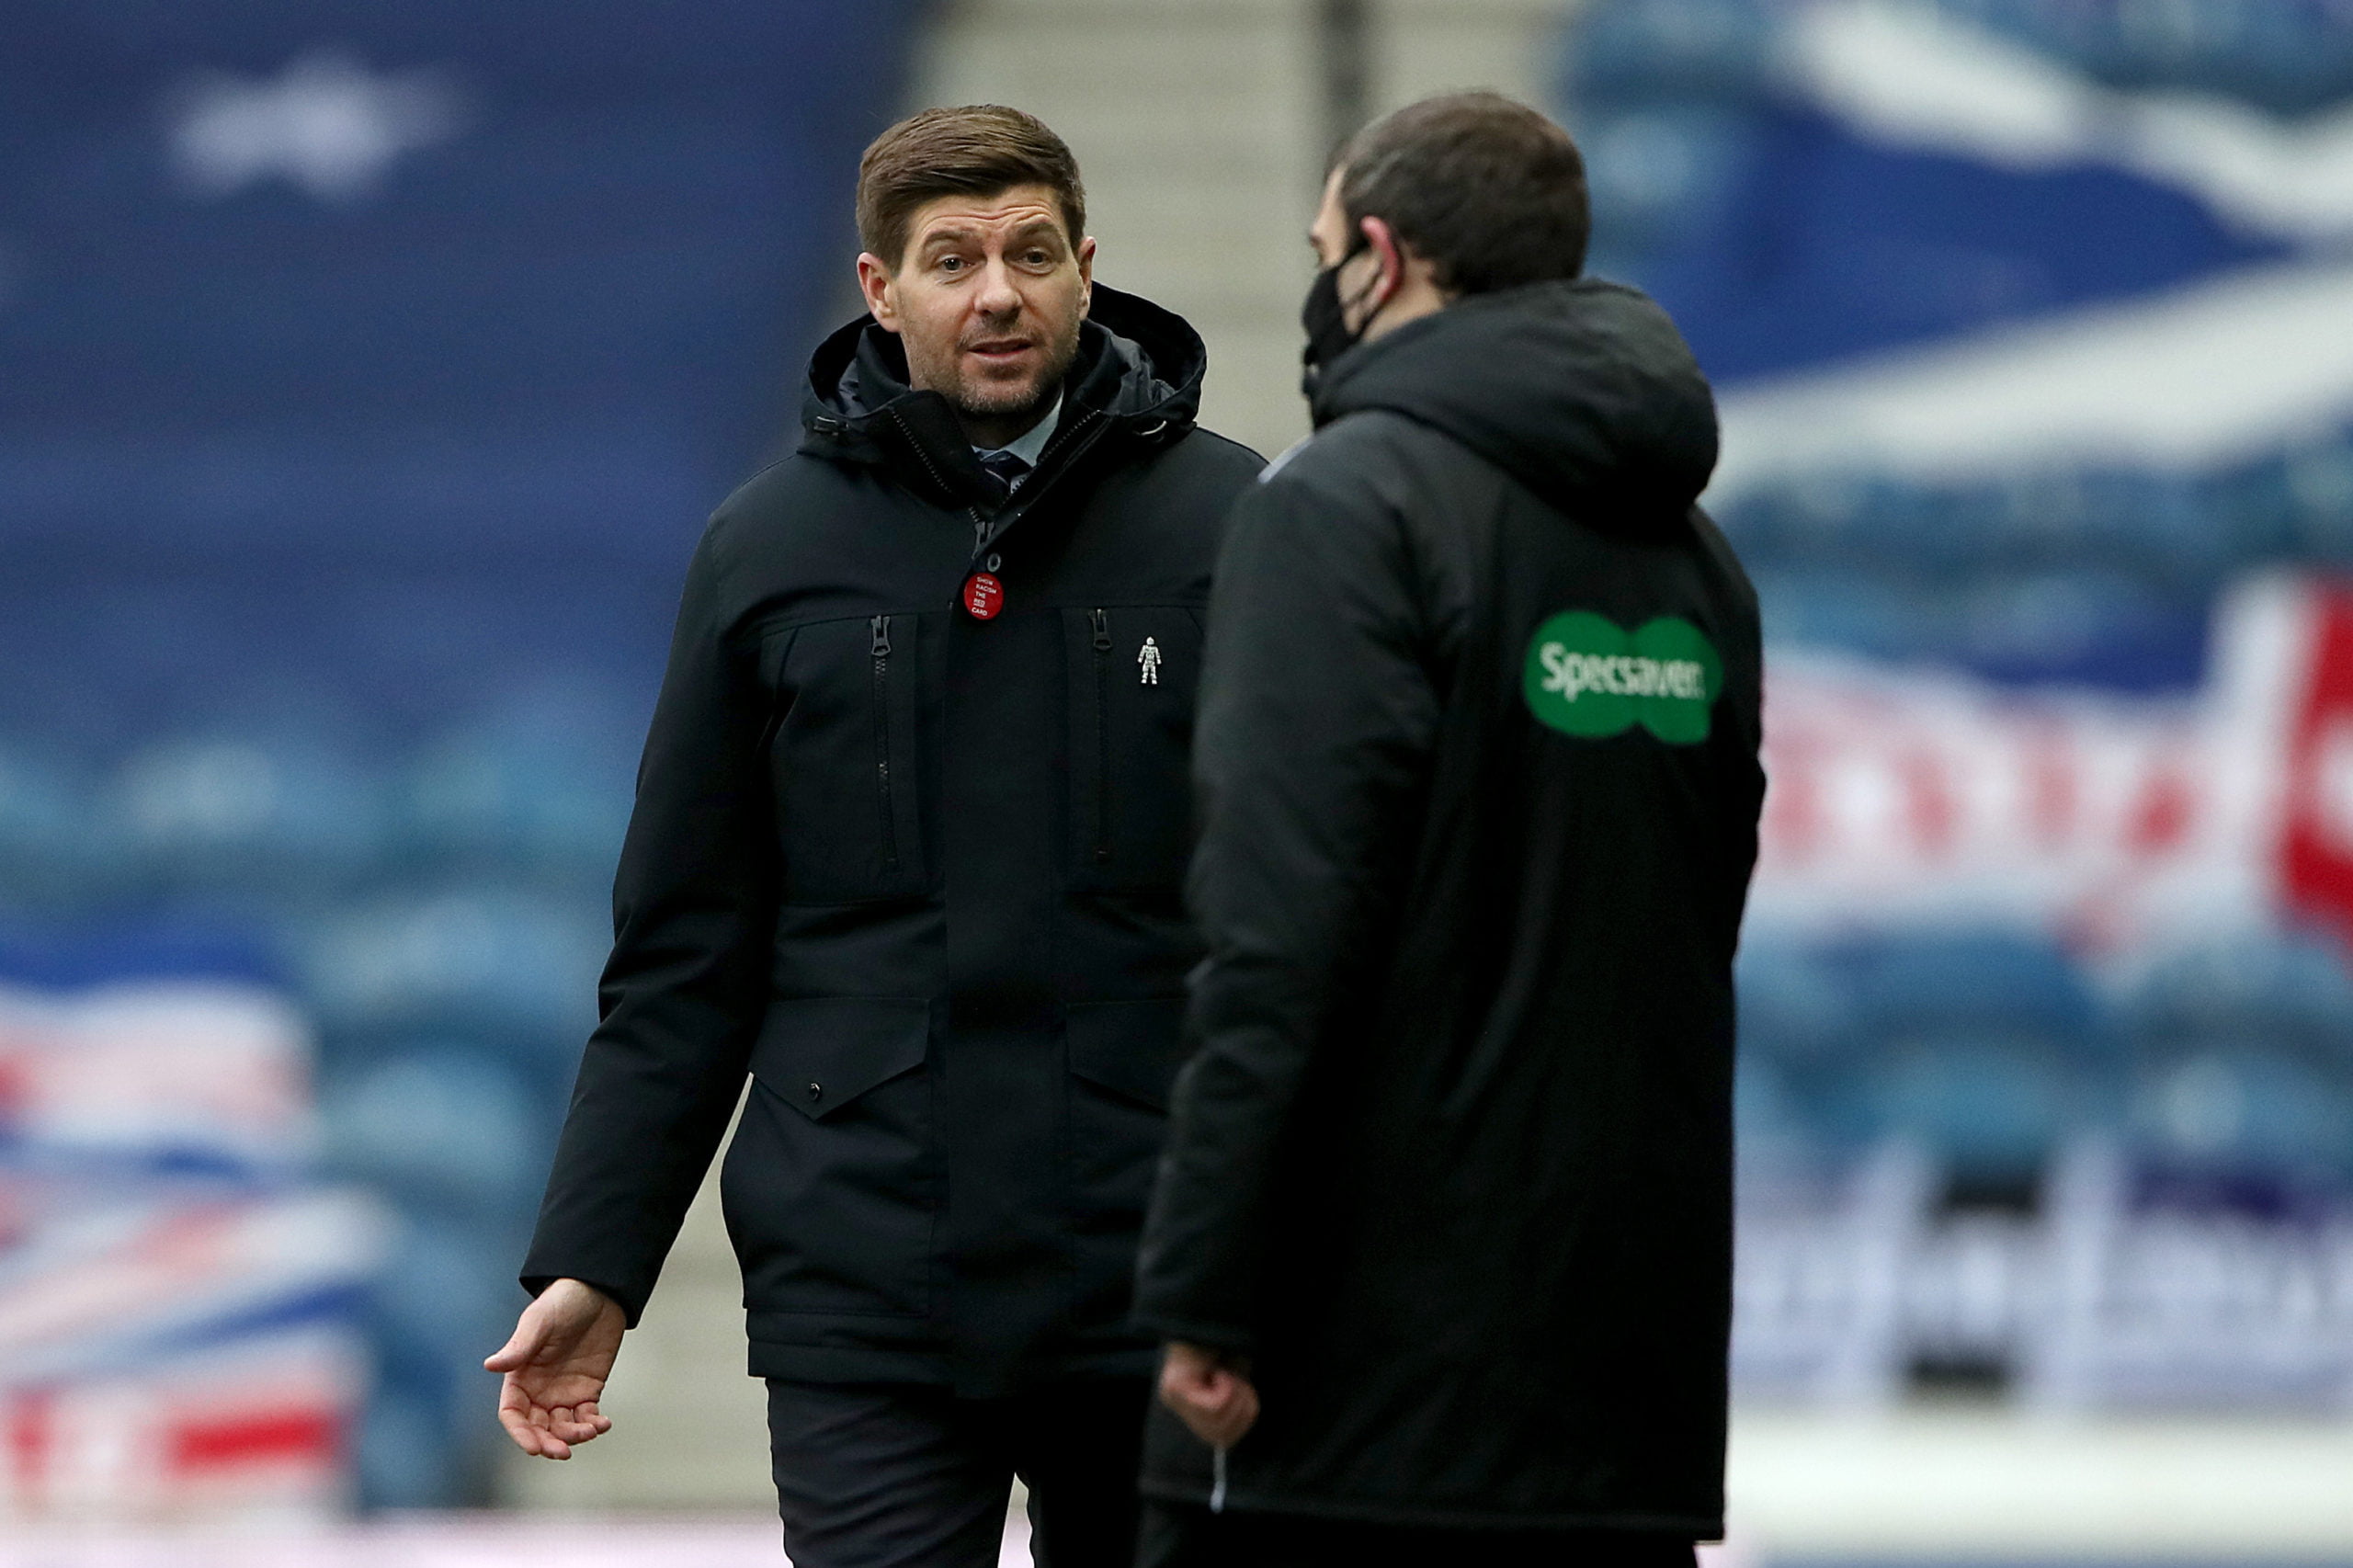 GLASGOW, SCOTLAND - FEBRUARY 13: Steven Gerrard, Manager of Rangers speaks with the Fourth Official during the Ladbrokes Scottish Premiership match between Rangers and Kilmarnock at Ibrox Stadium on February 13, 2021 in Glasgow, Scotland. Sporting stadiums around the UK remain under strict restrictions due to the Coronavirus Pandemic as Government social distancing laws prohibit fans inside venues resulting in games being played behind closed doors. (Photo by Ian MacNicol/Getty Images)